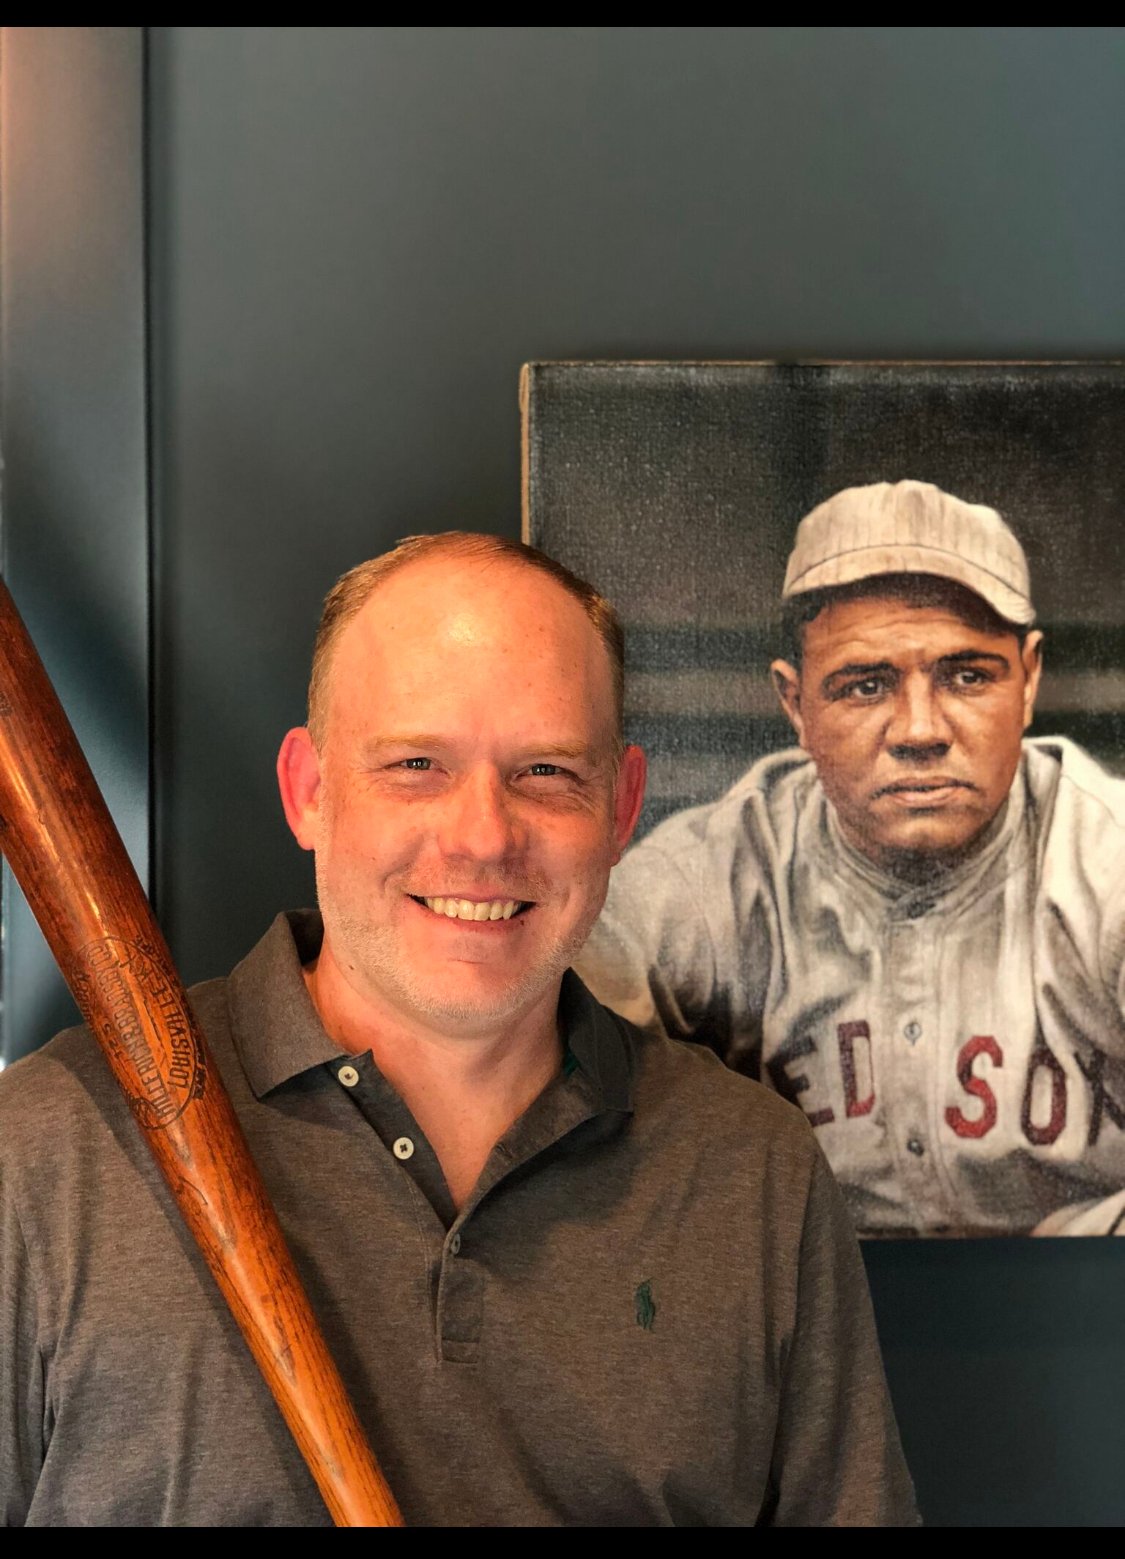 Collector Matches Ty Cobb Bat To Iconic 1913 Photograph